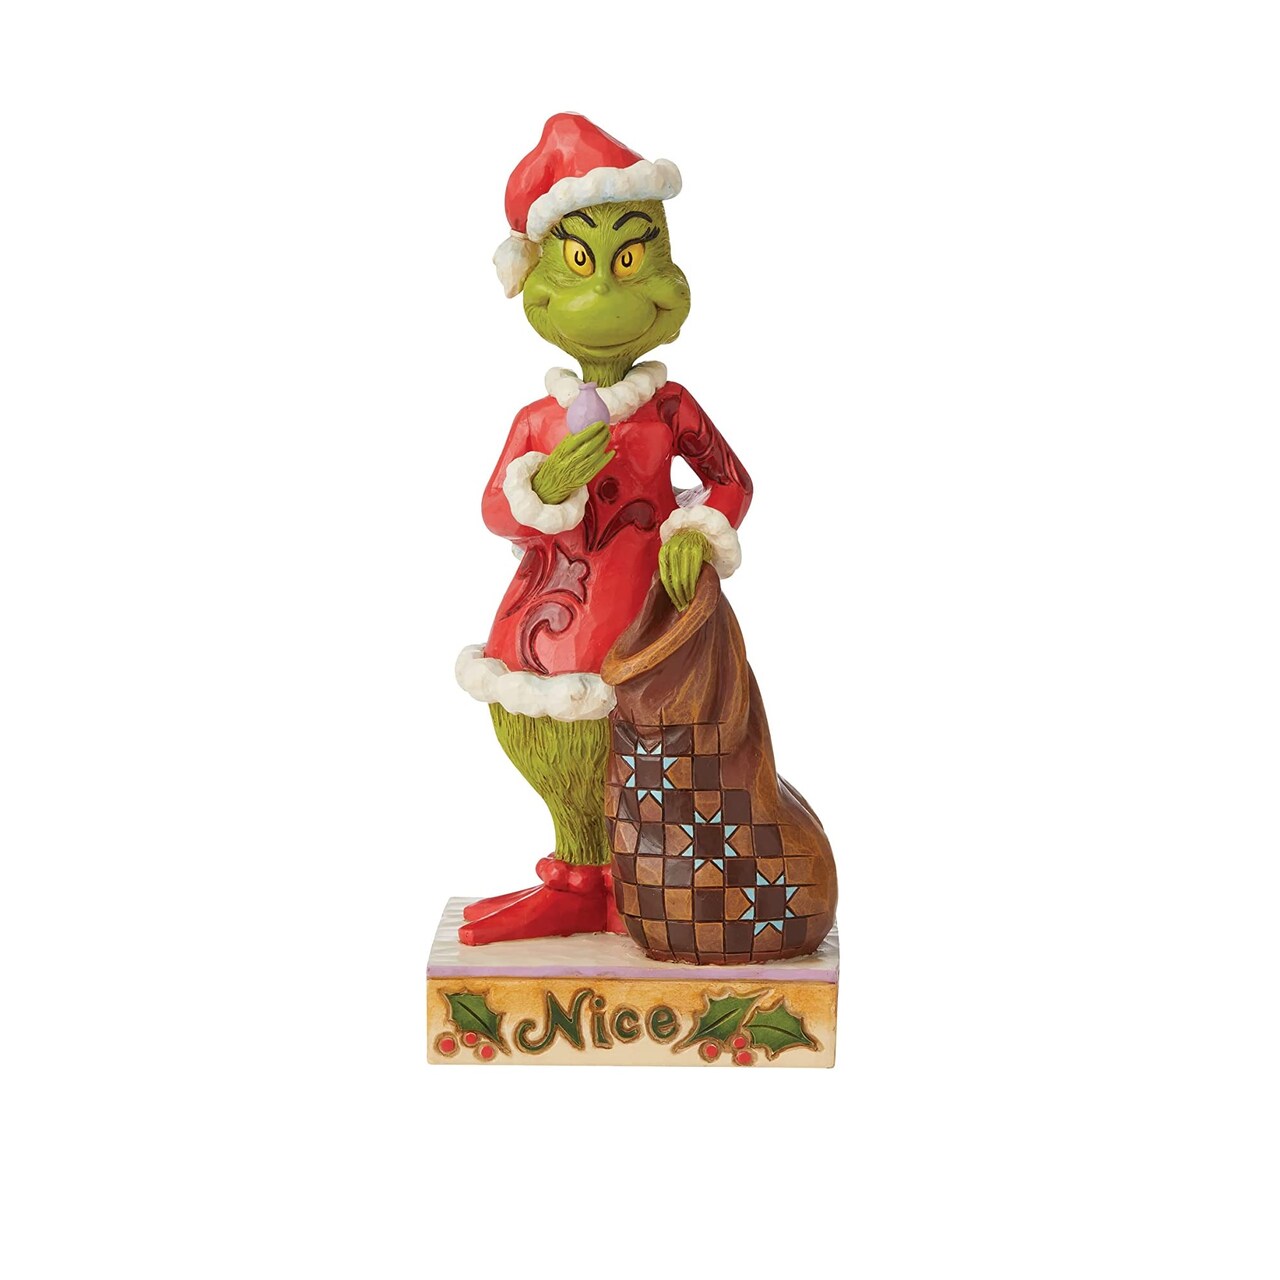 Department 56 Dept 56 Two Sided Naughty and Nice Grinch Christmas Figure